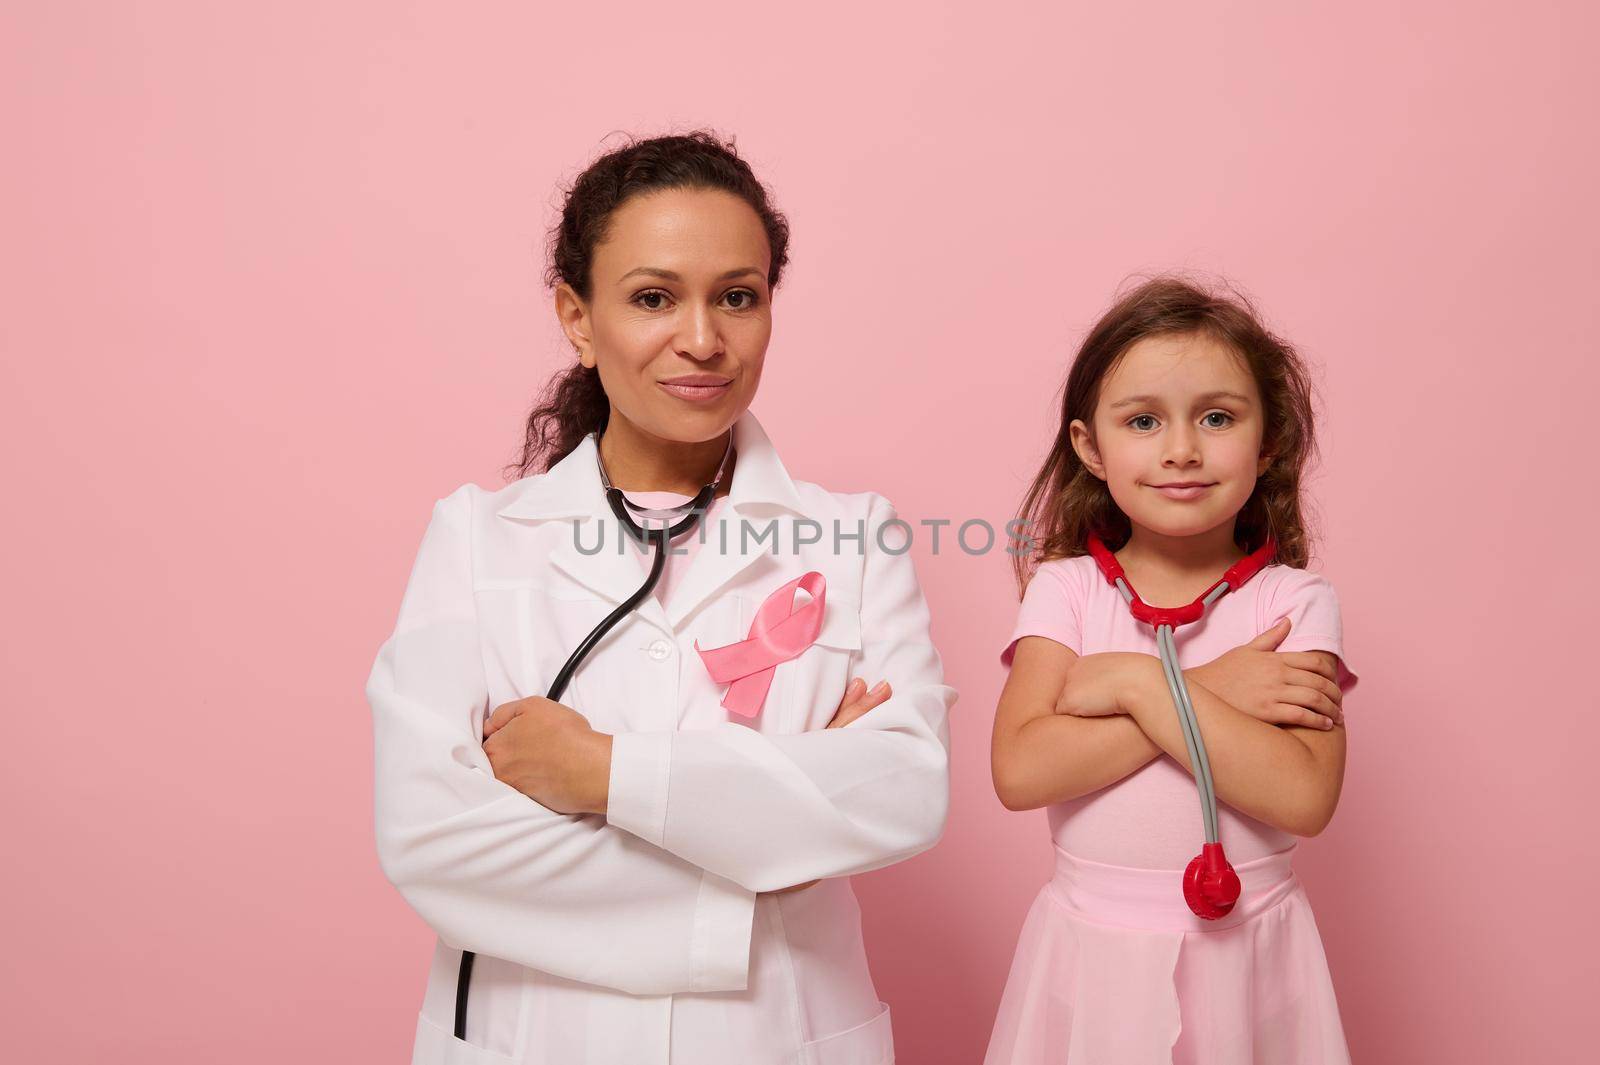 Charming woman doctor in white medical gown stands next to a cute little girl in pink, both with crosses arms on chest and wearing a pink ribbon, symbol of Breast Cancer Awareness Day. Medical concept by artgf